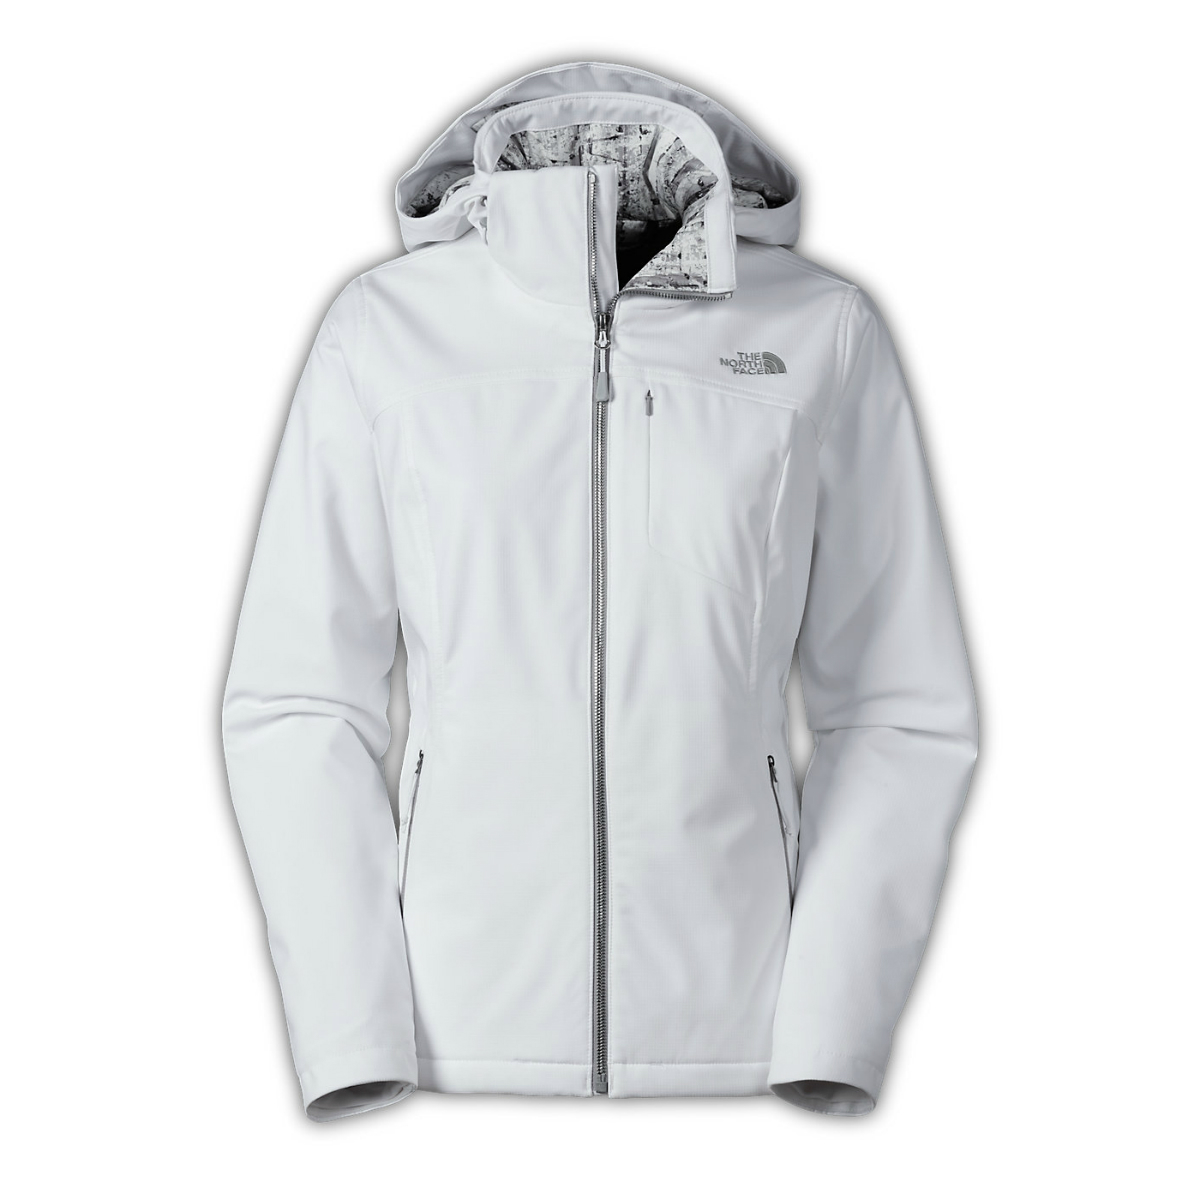 north face winter jacket white